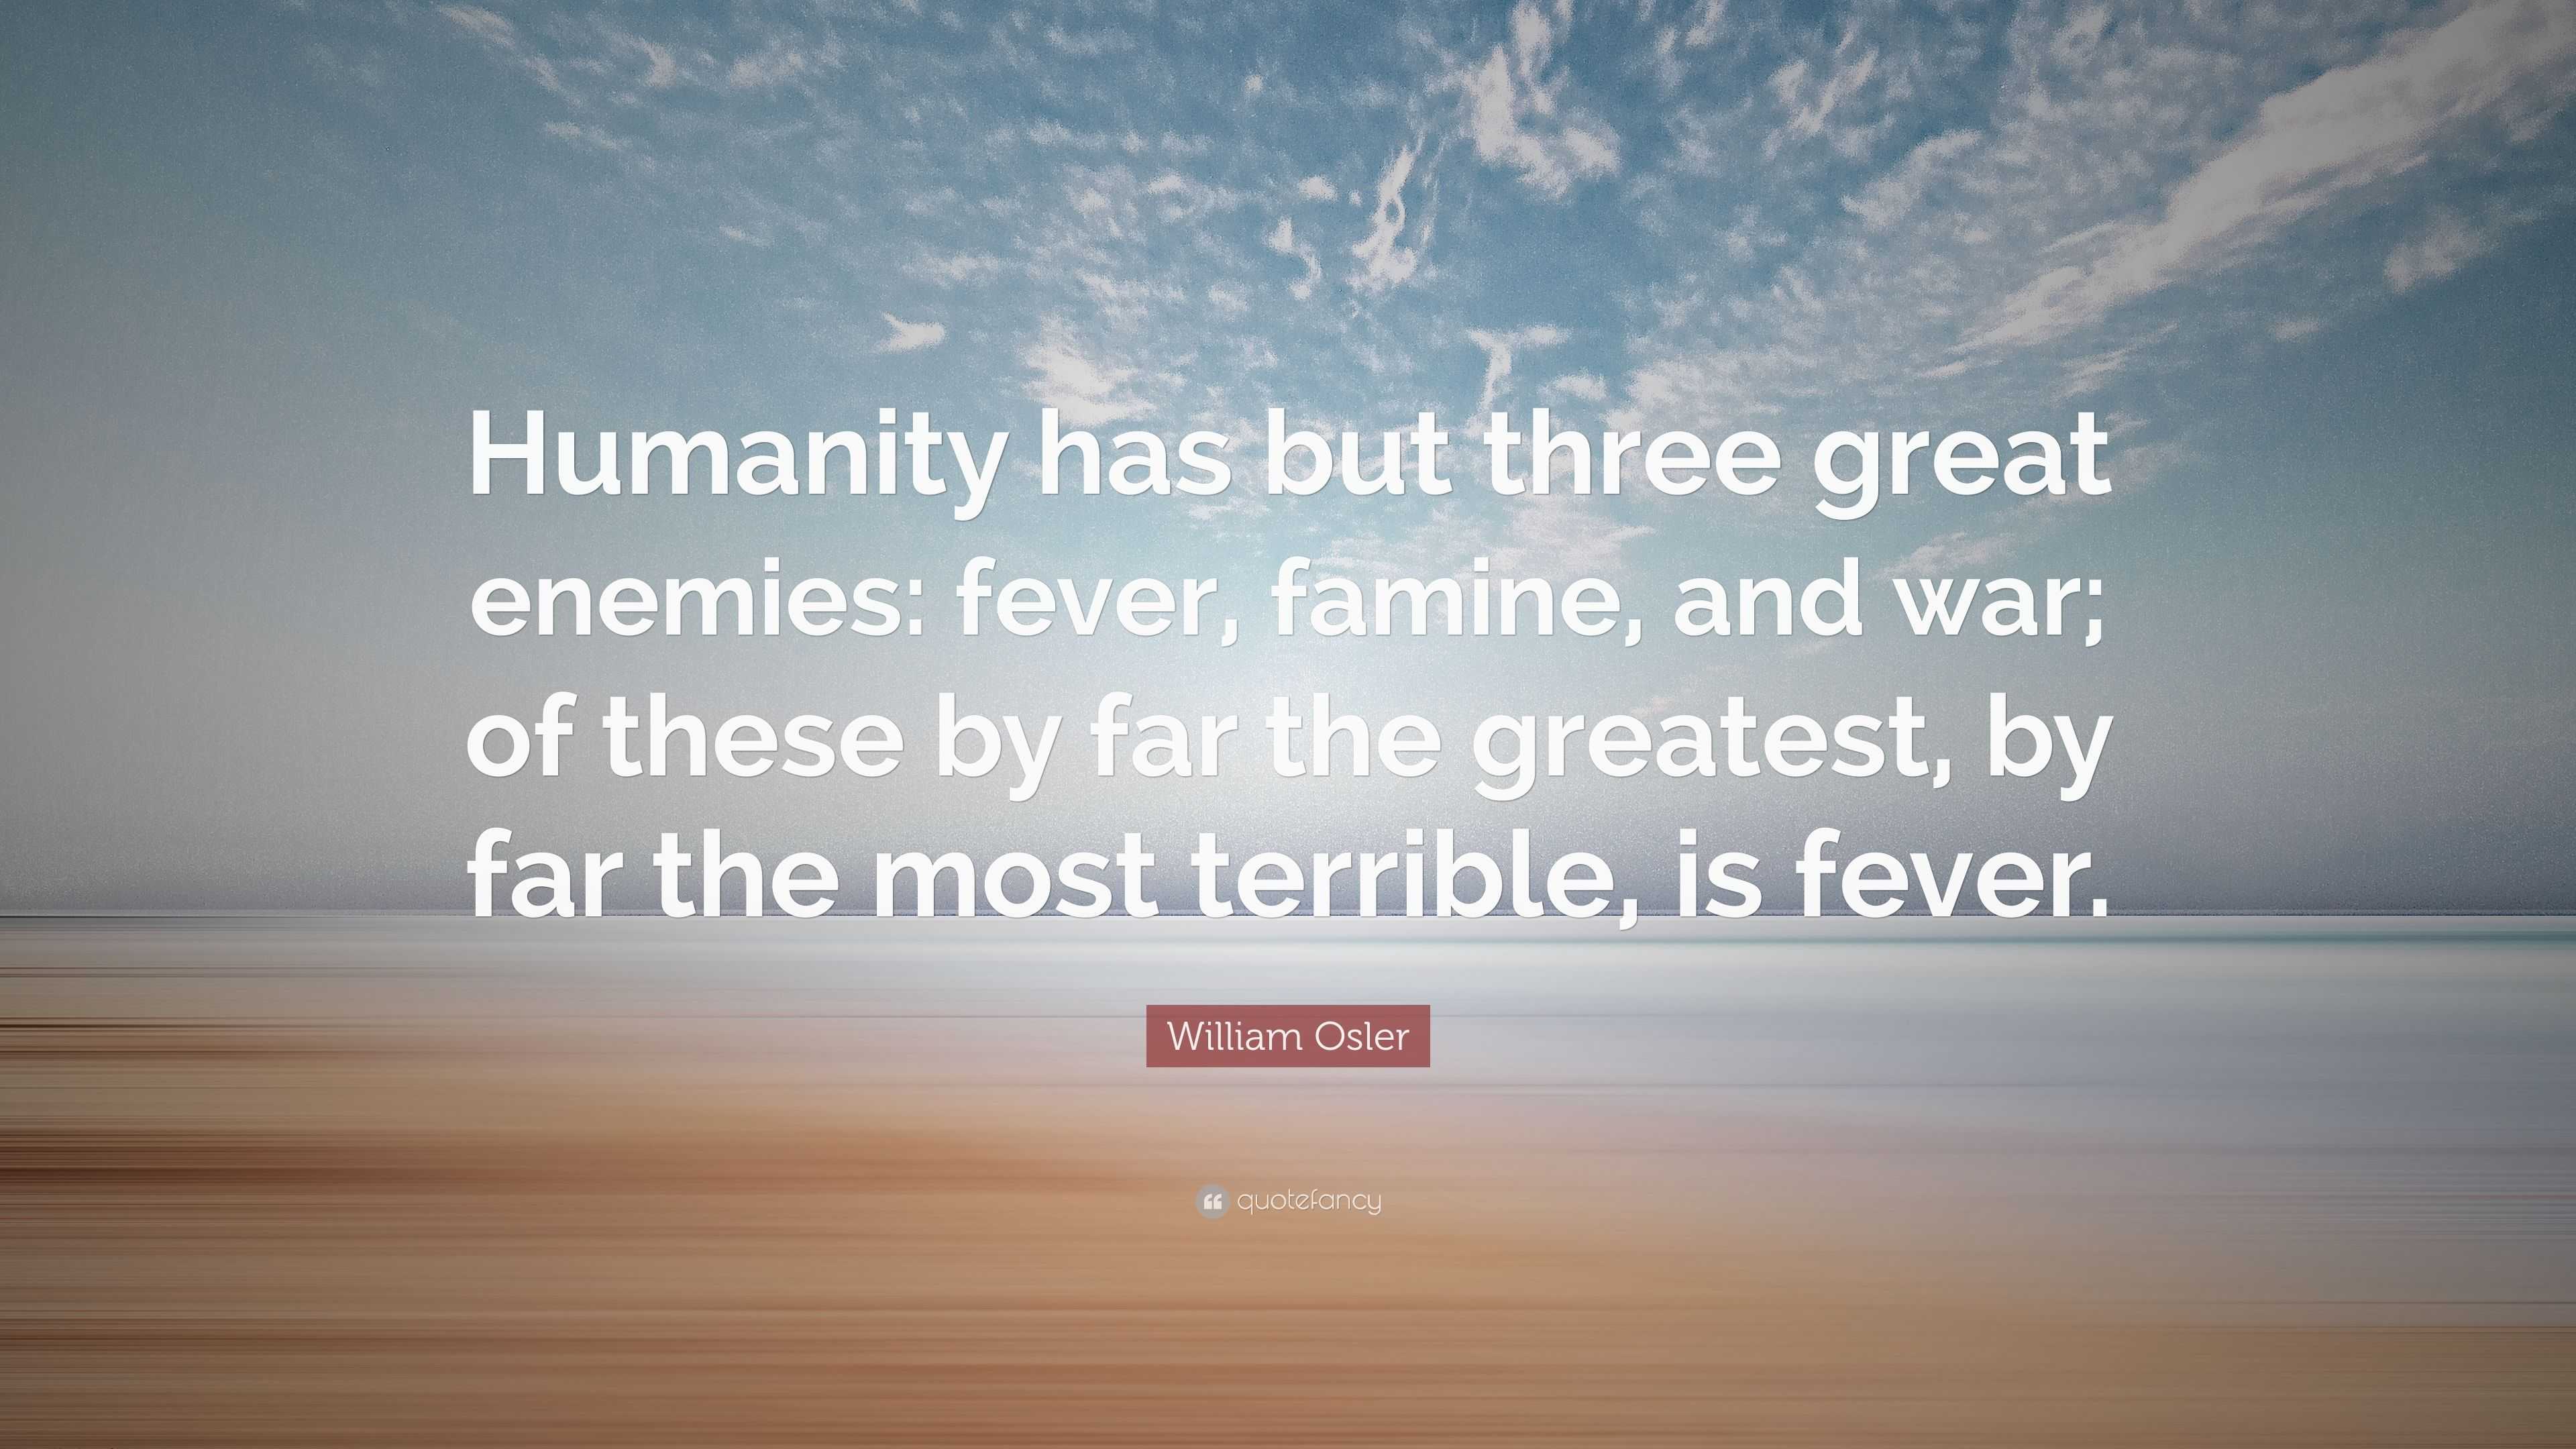 William Osler Quote: “Humanity has but three great enemies: fever